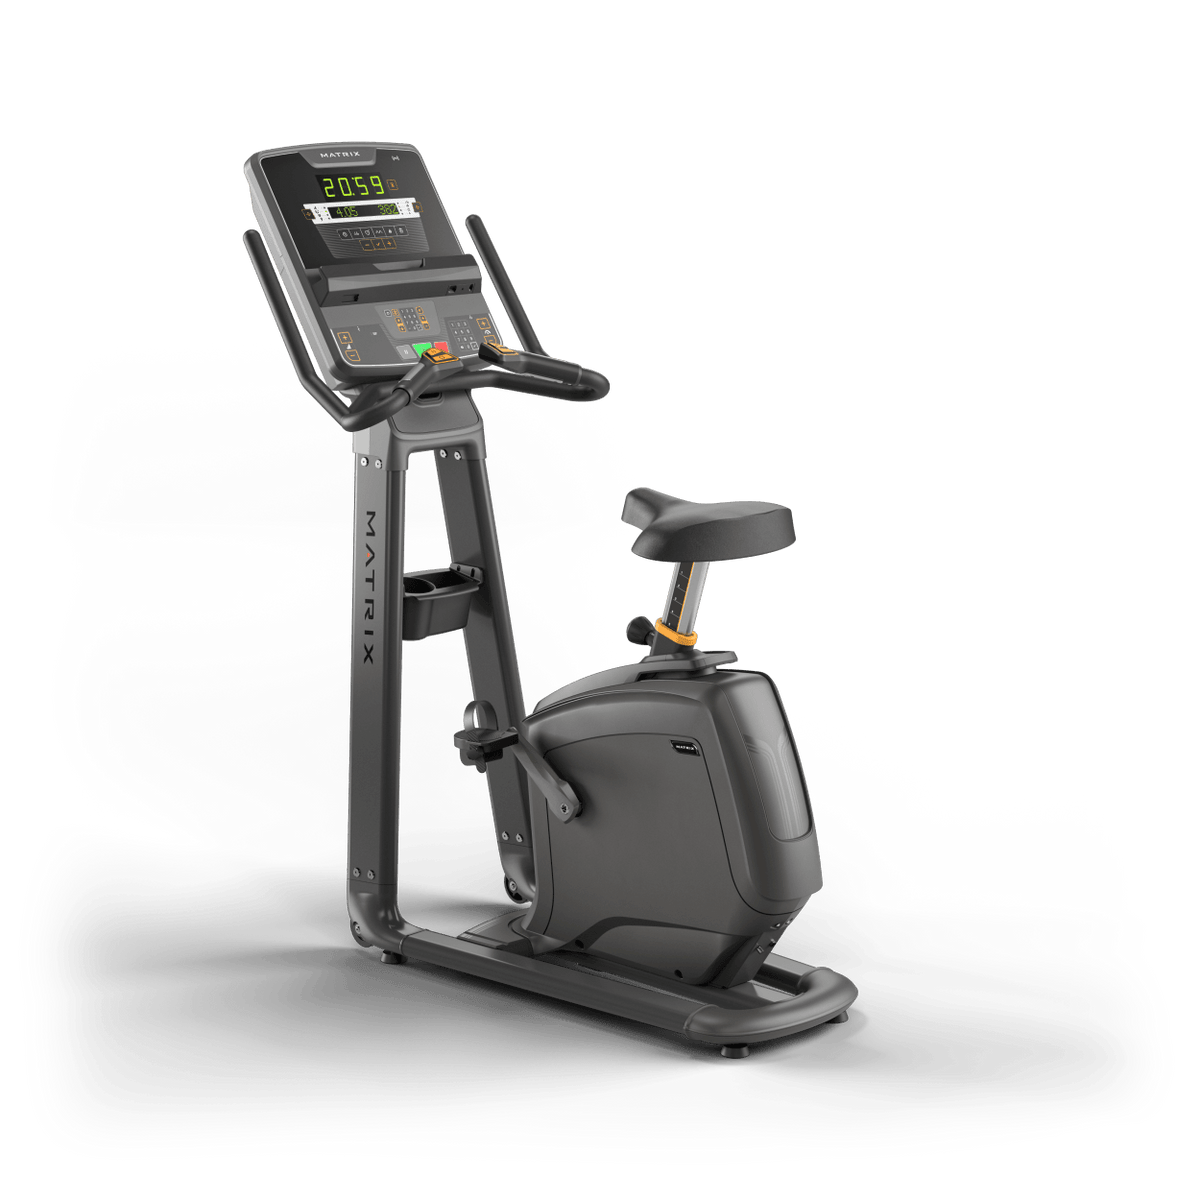 Matrix Fitness Lifestyle Upright with LED Console rear view | Fitness Experience